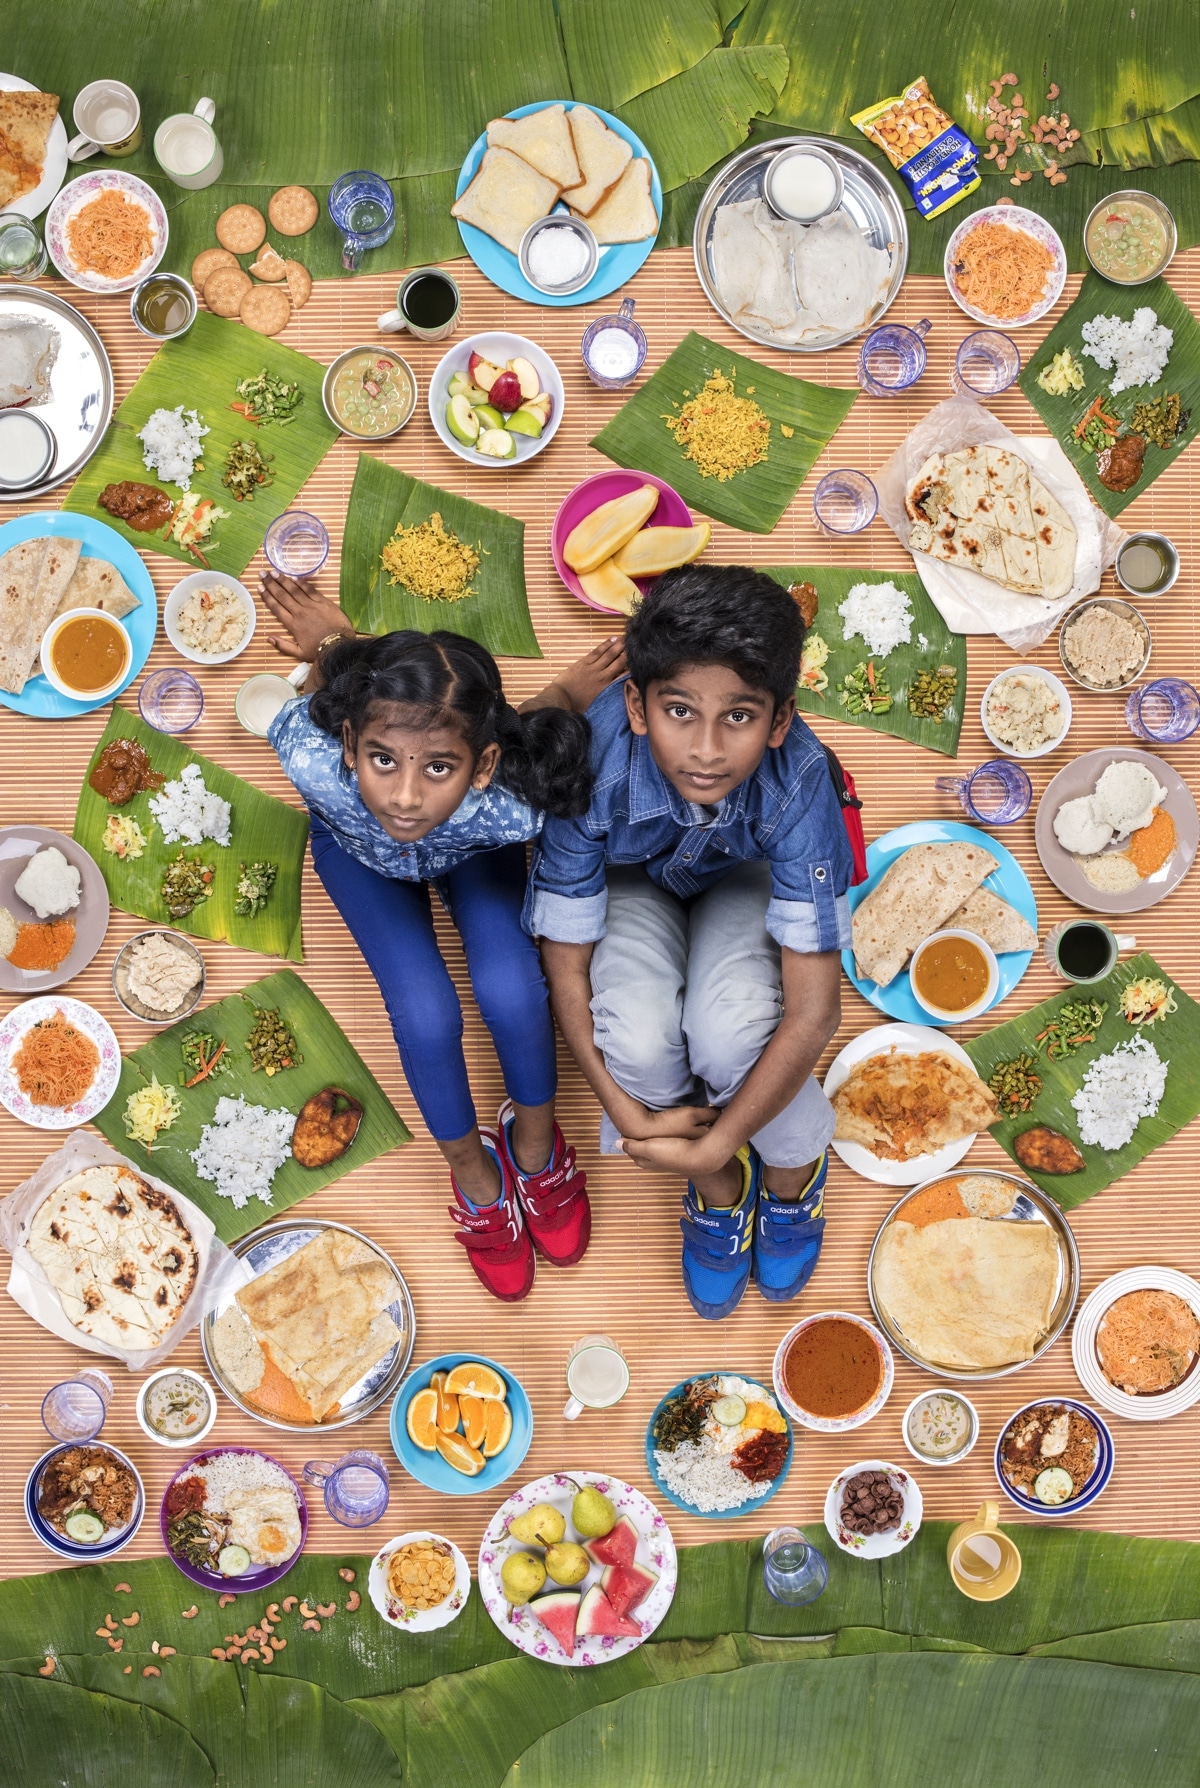 Interview: Kids Around the World Photographed Surrounded by Their Weekly Diet